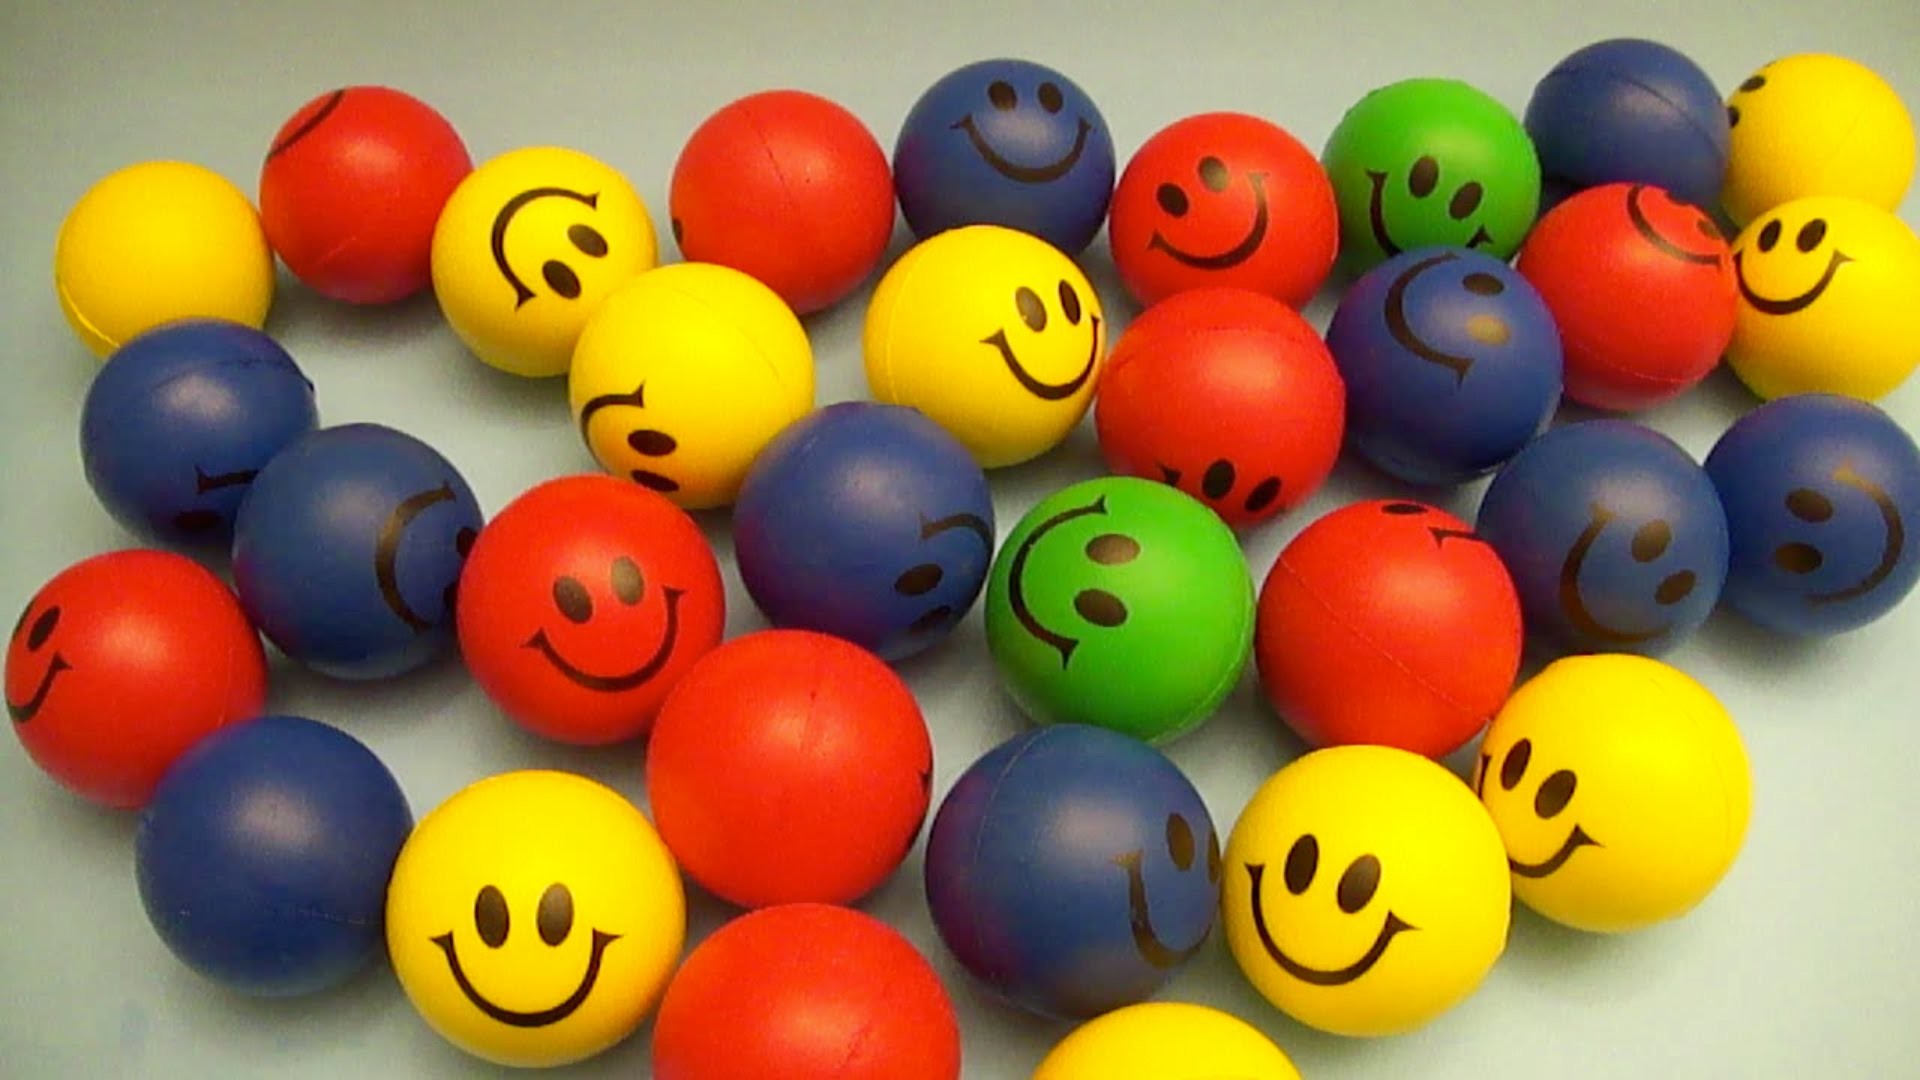 Learn Colours With Huge Smiley Face Squishy Balls Fun - Colourful Smiley Wallpaper Hd - HD Wallpaper 